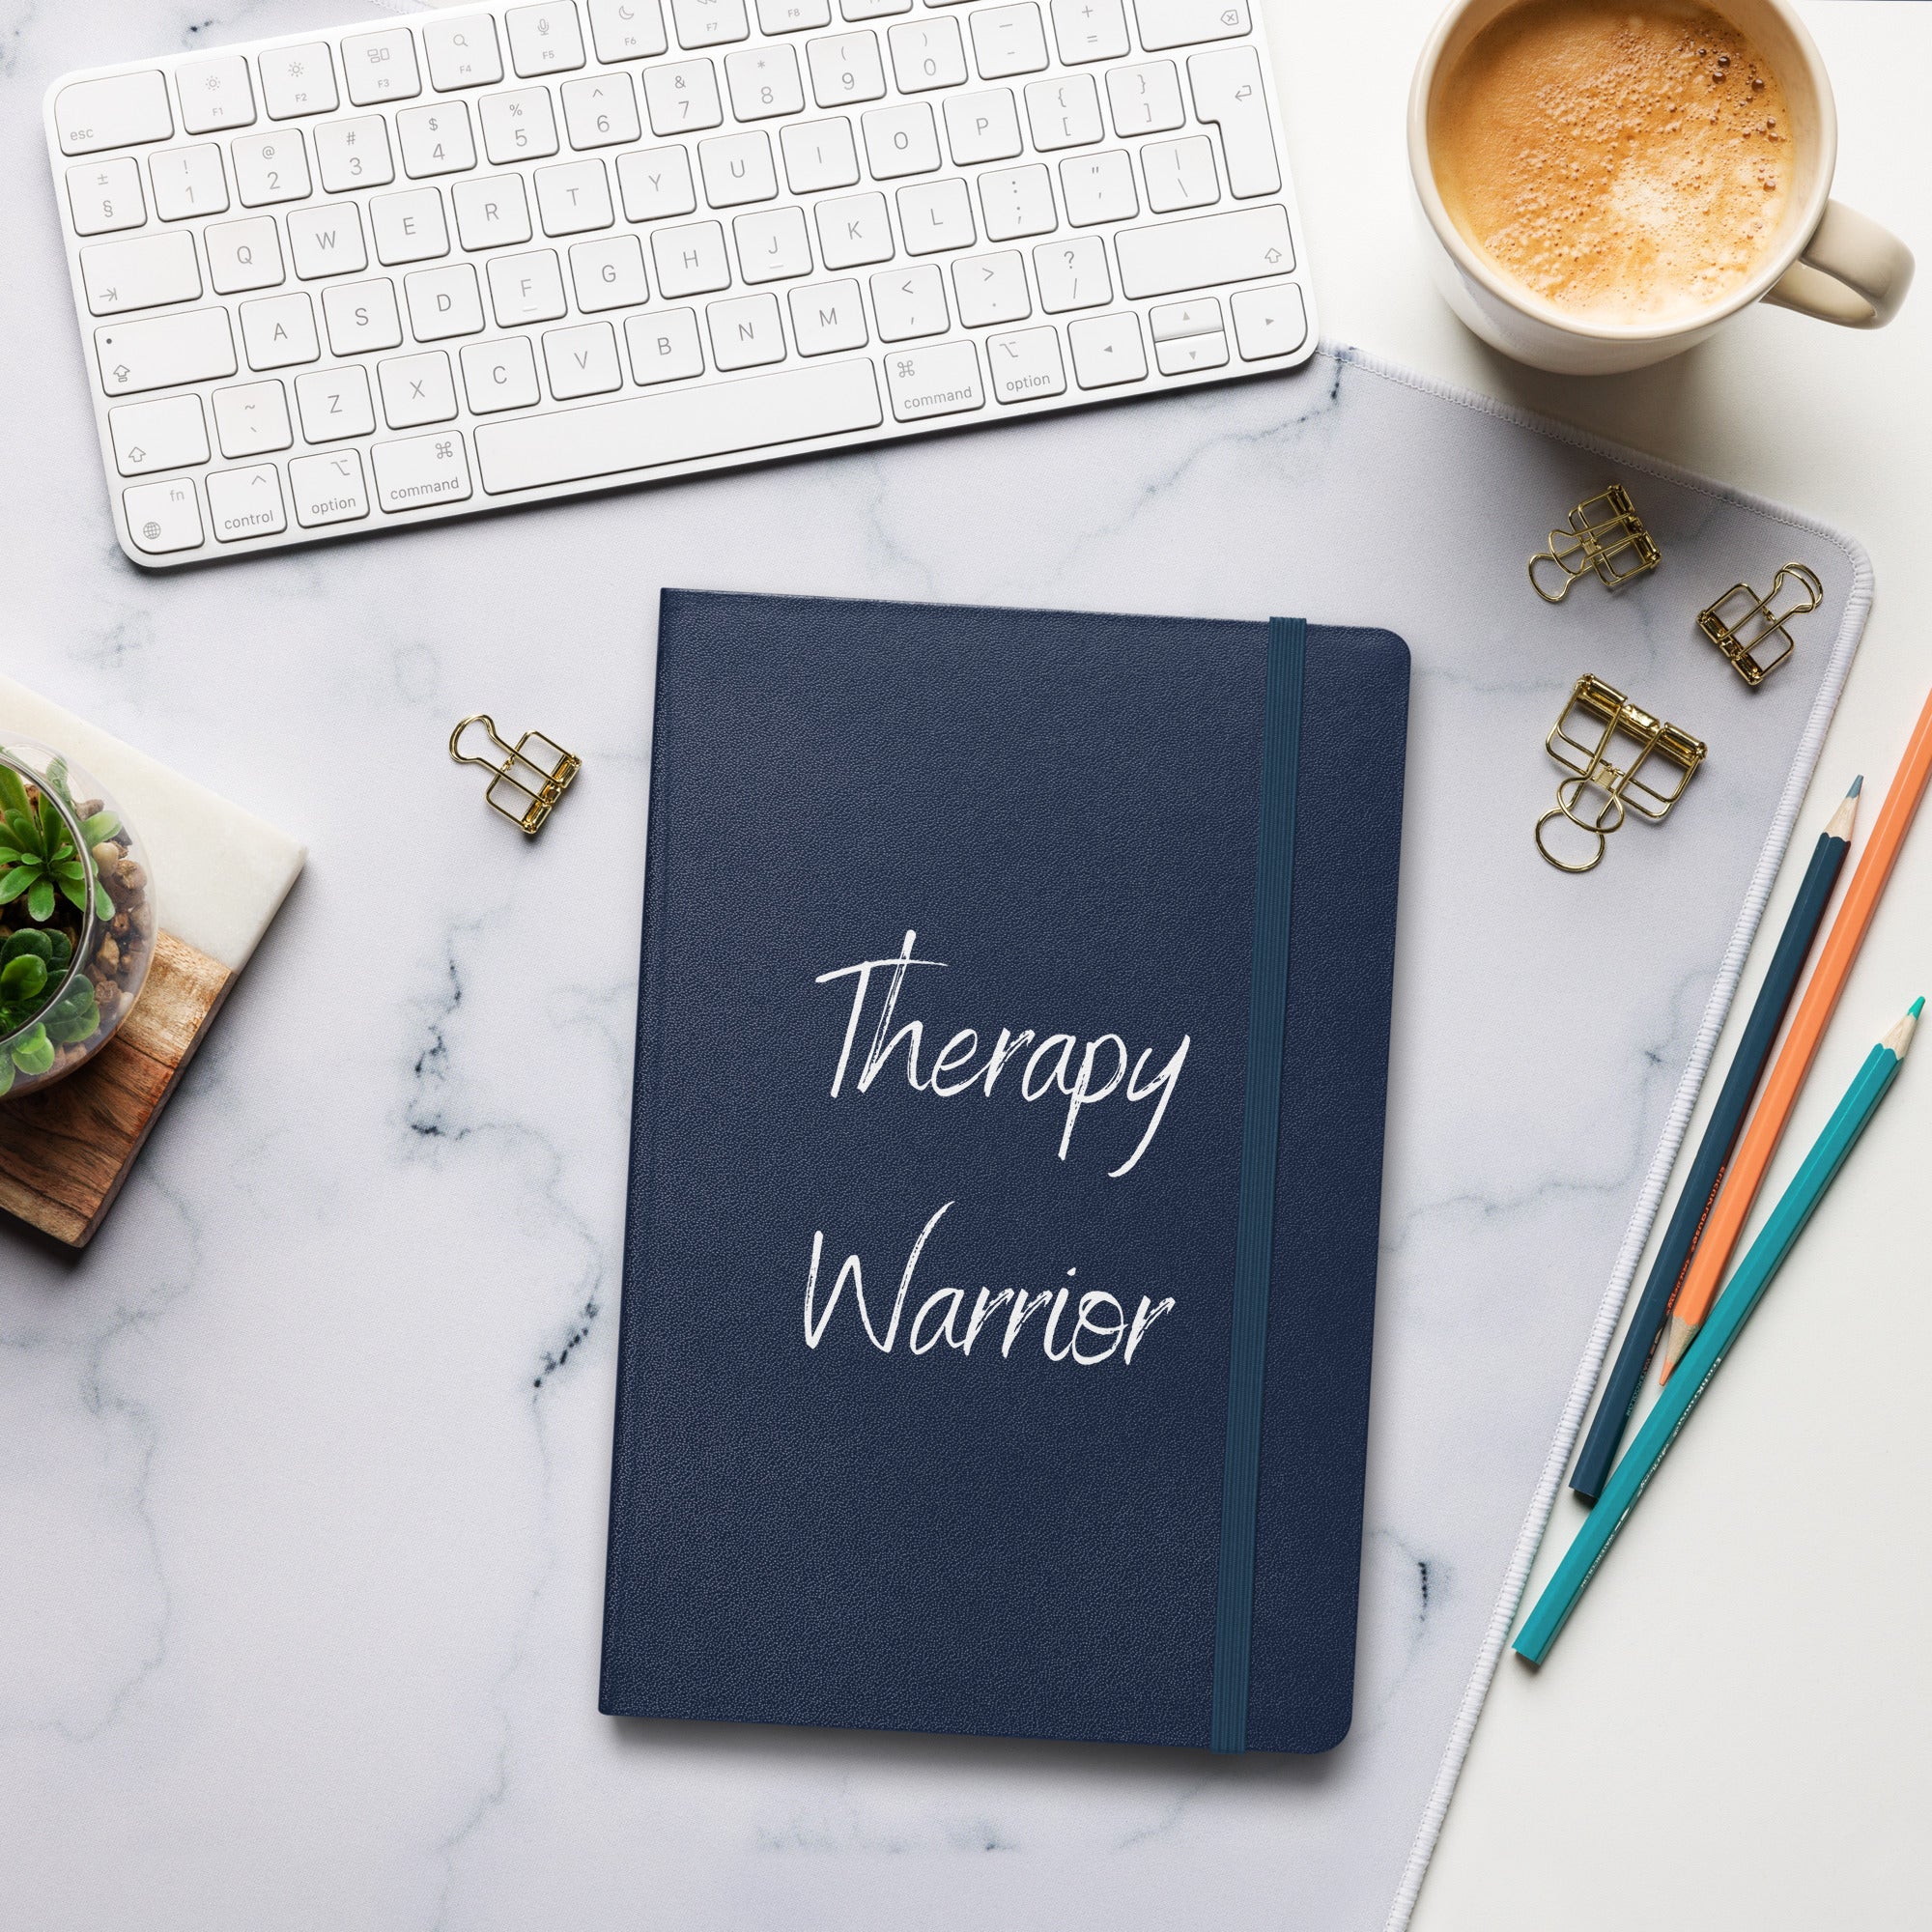 Therapy Warrior - Hardcover Bound Notebook